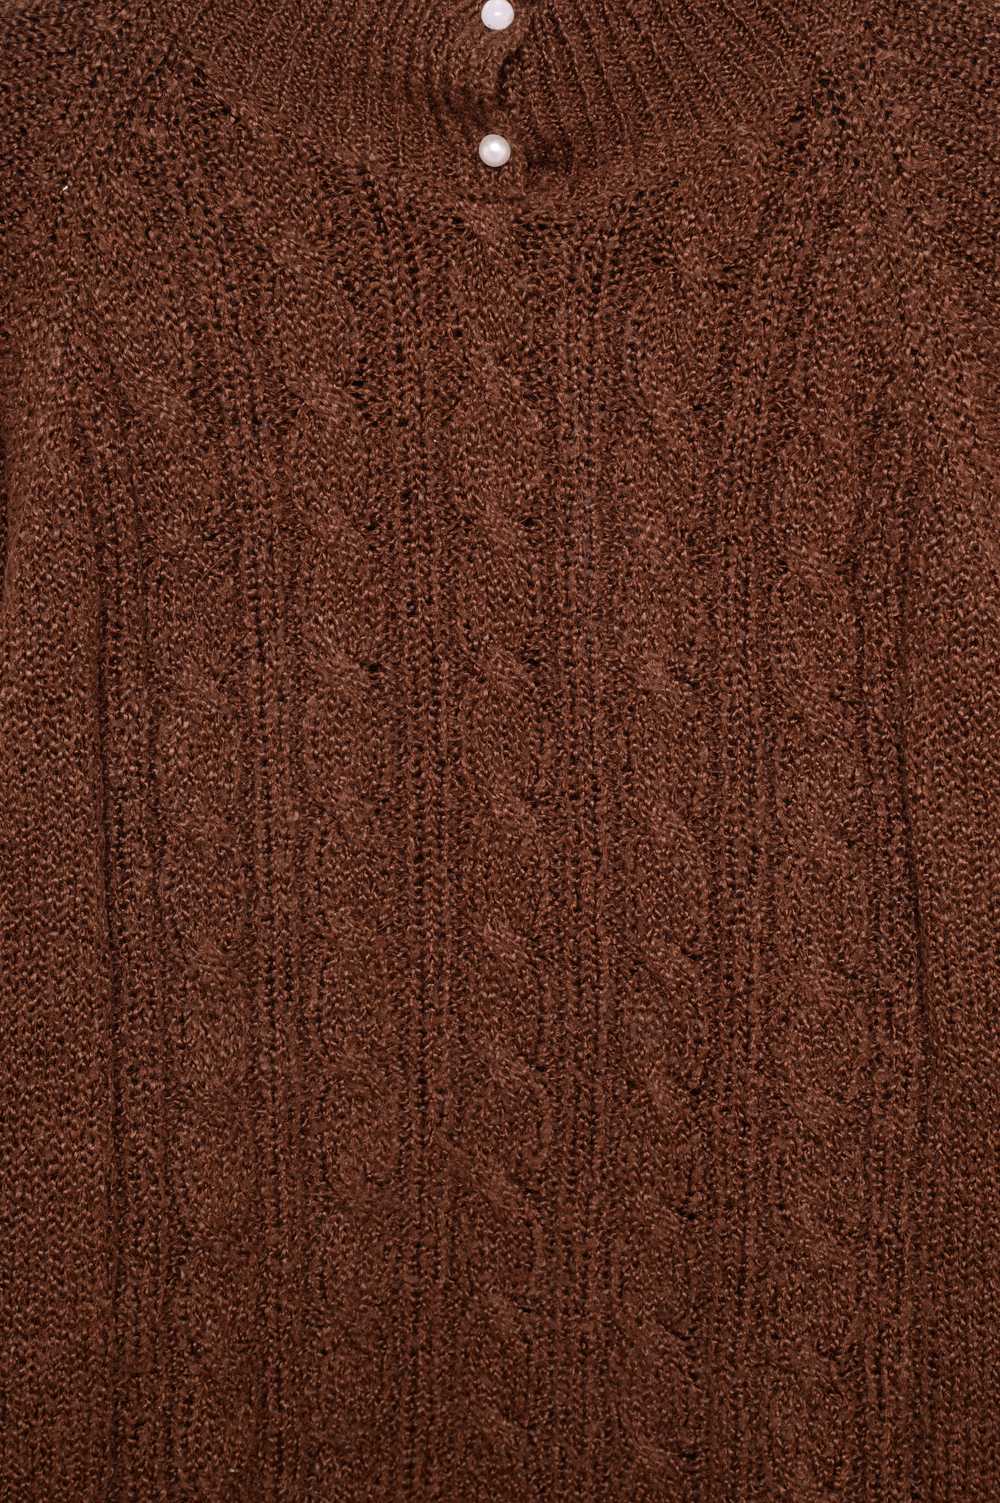 Cable Knit Sweater - image 3